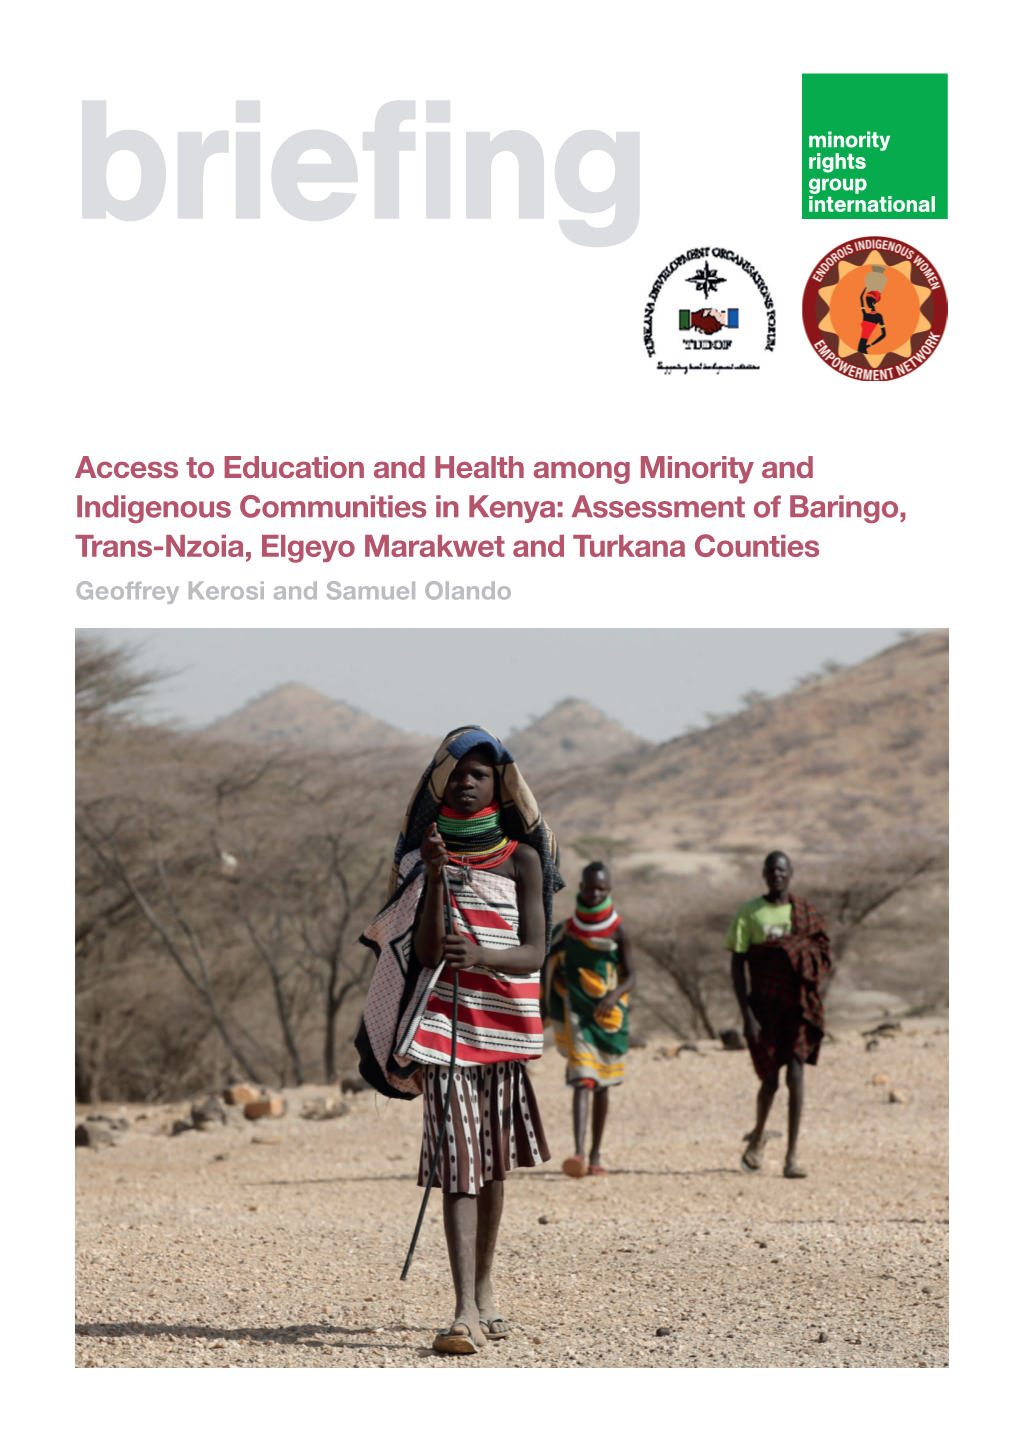 Access to Education and Health Among Minority and Indigenous